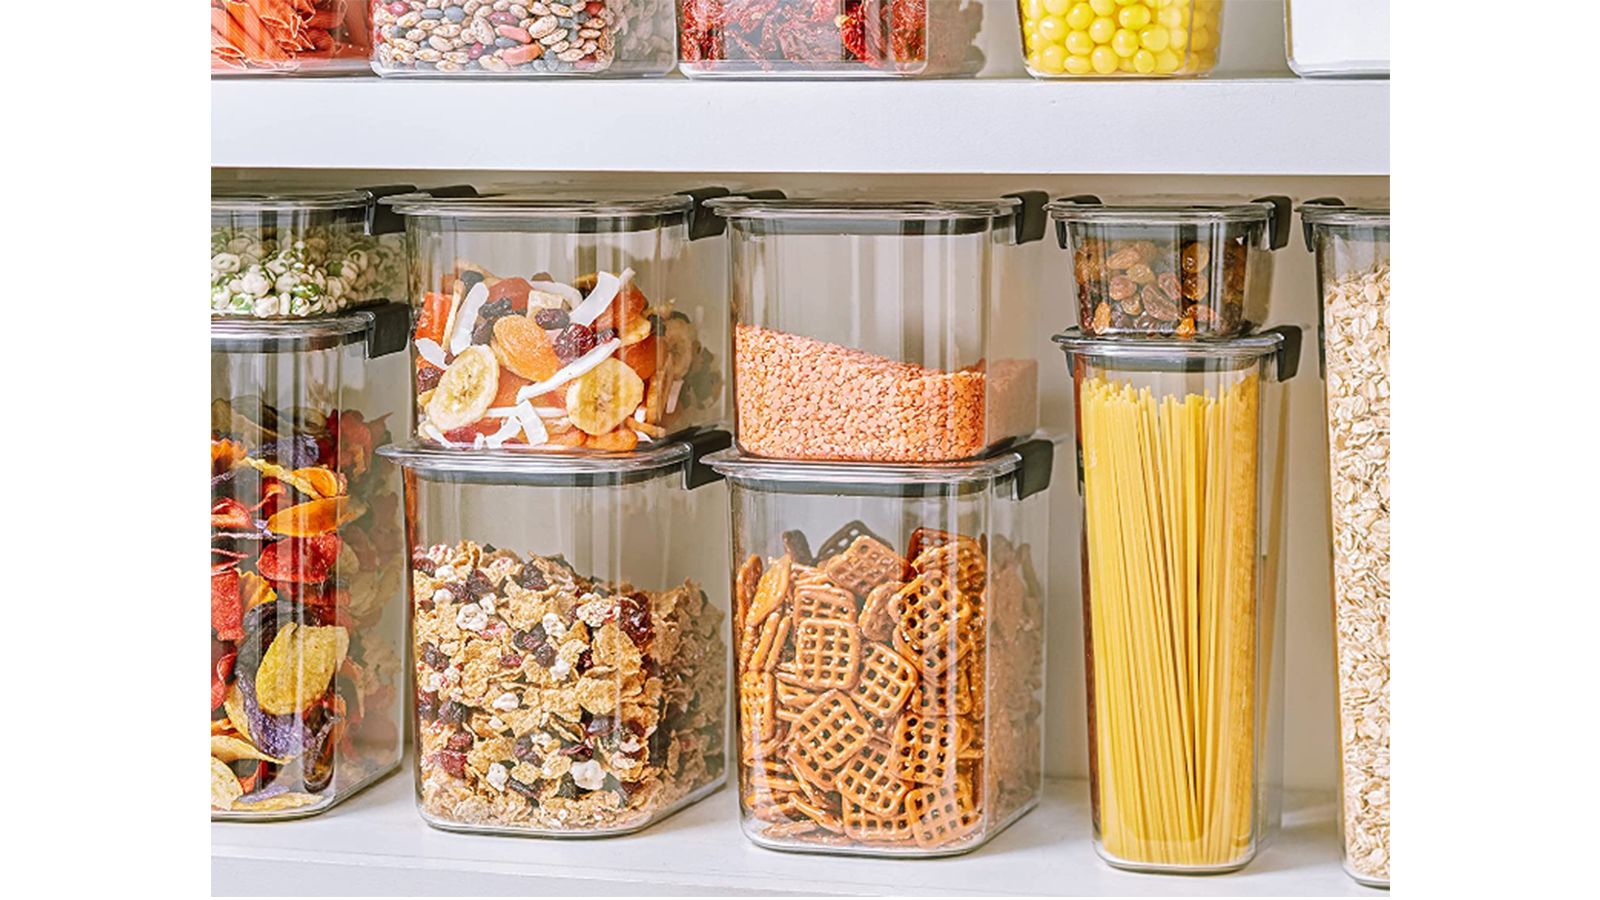 https://media.cnn.com/api/v1/images/stellar/prod/rubbermaid-10-piece-brilliance-food-storage-containers-for-pantry.jpg?q=h_900,w_1600,x_0,y_0